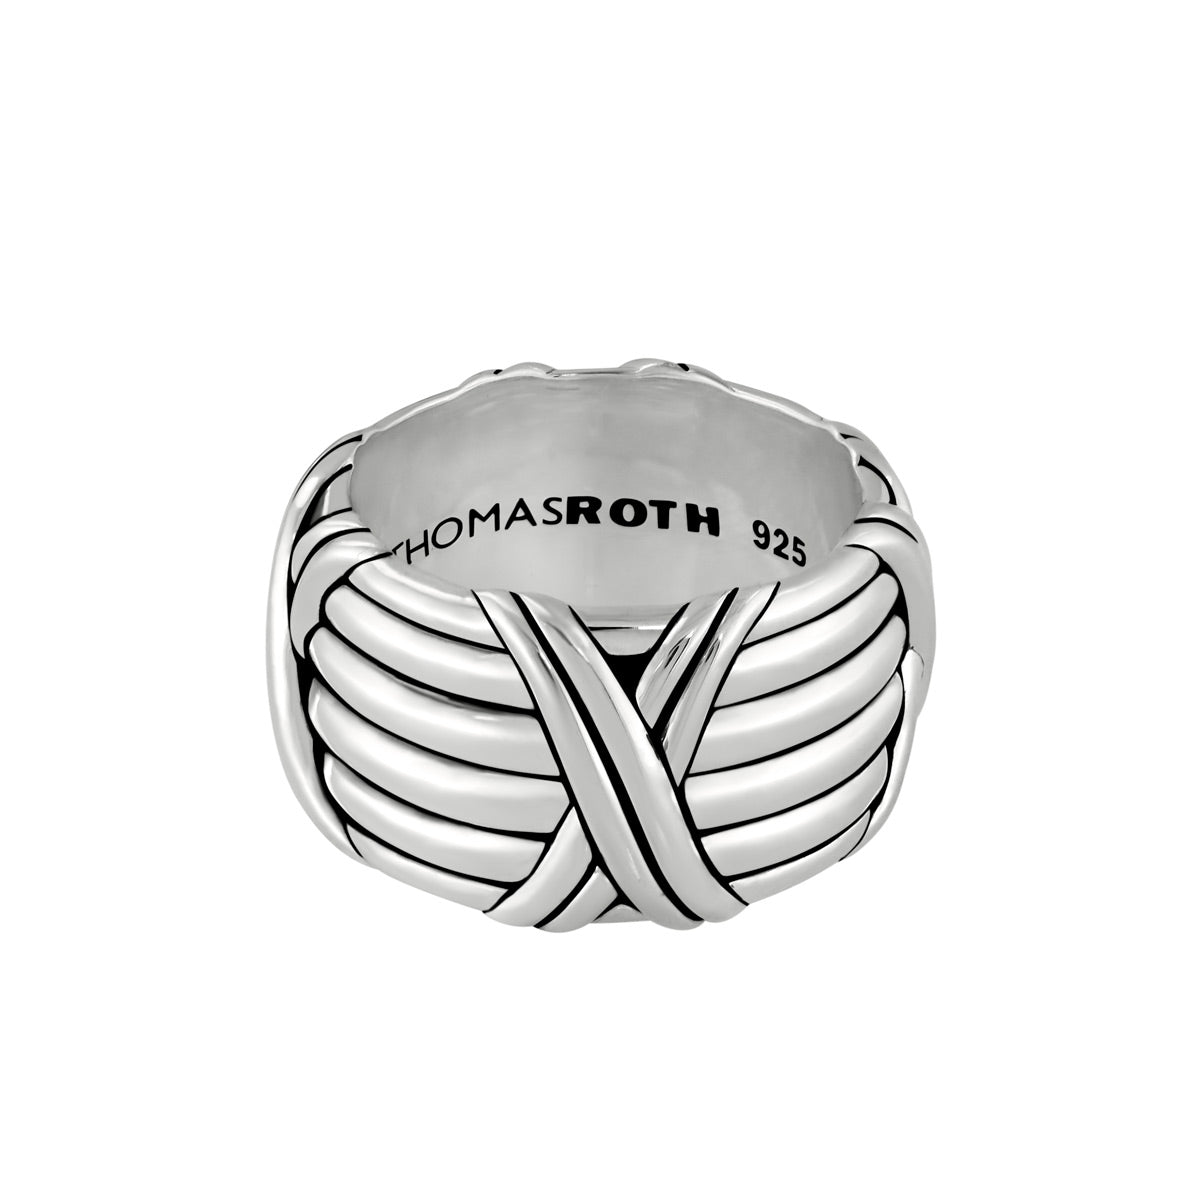 Signature Classic Kiss Wide Band Ring in sterling silver